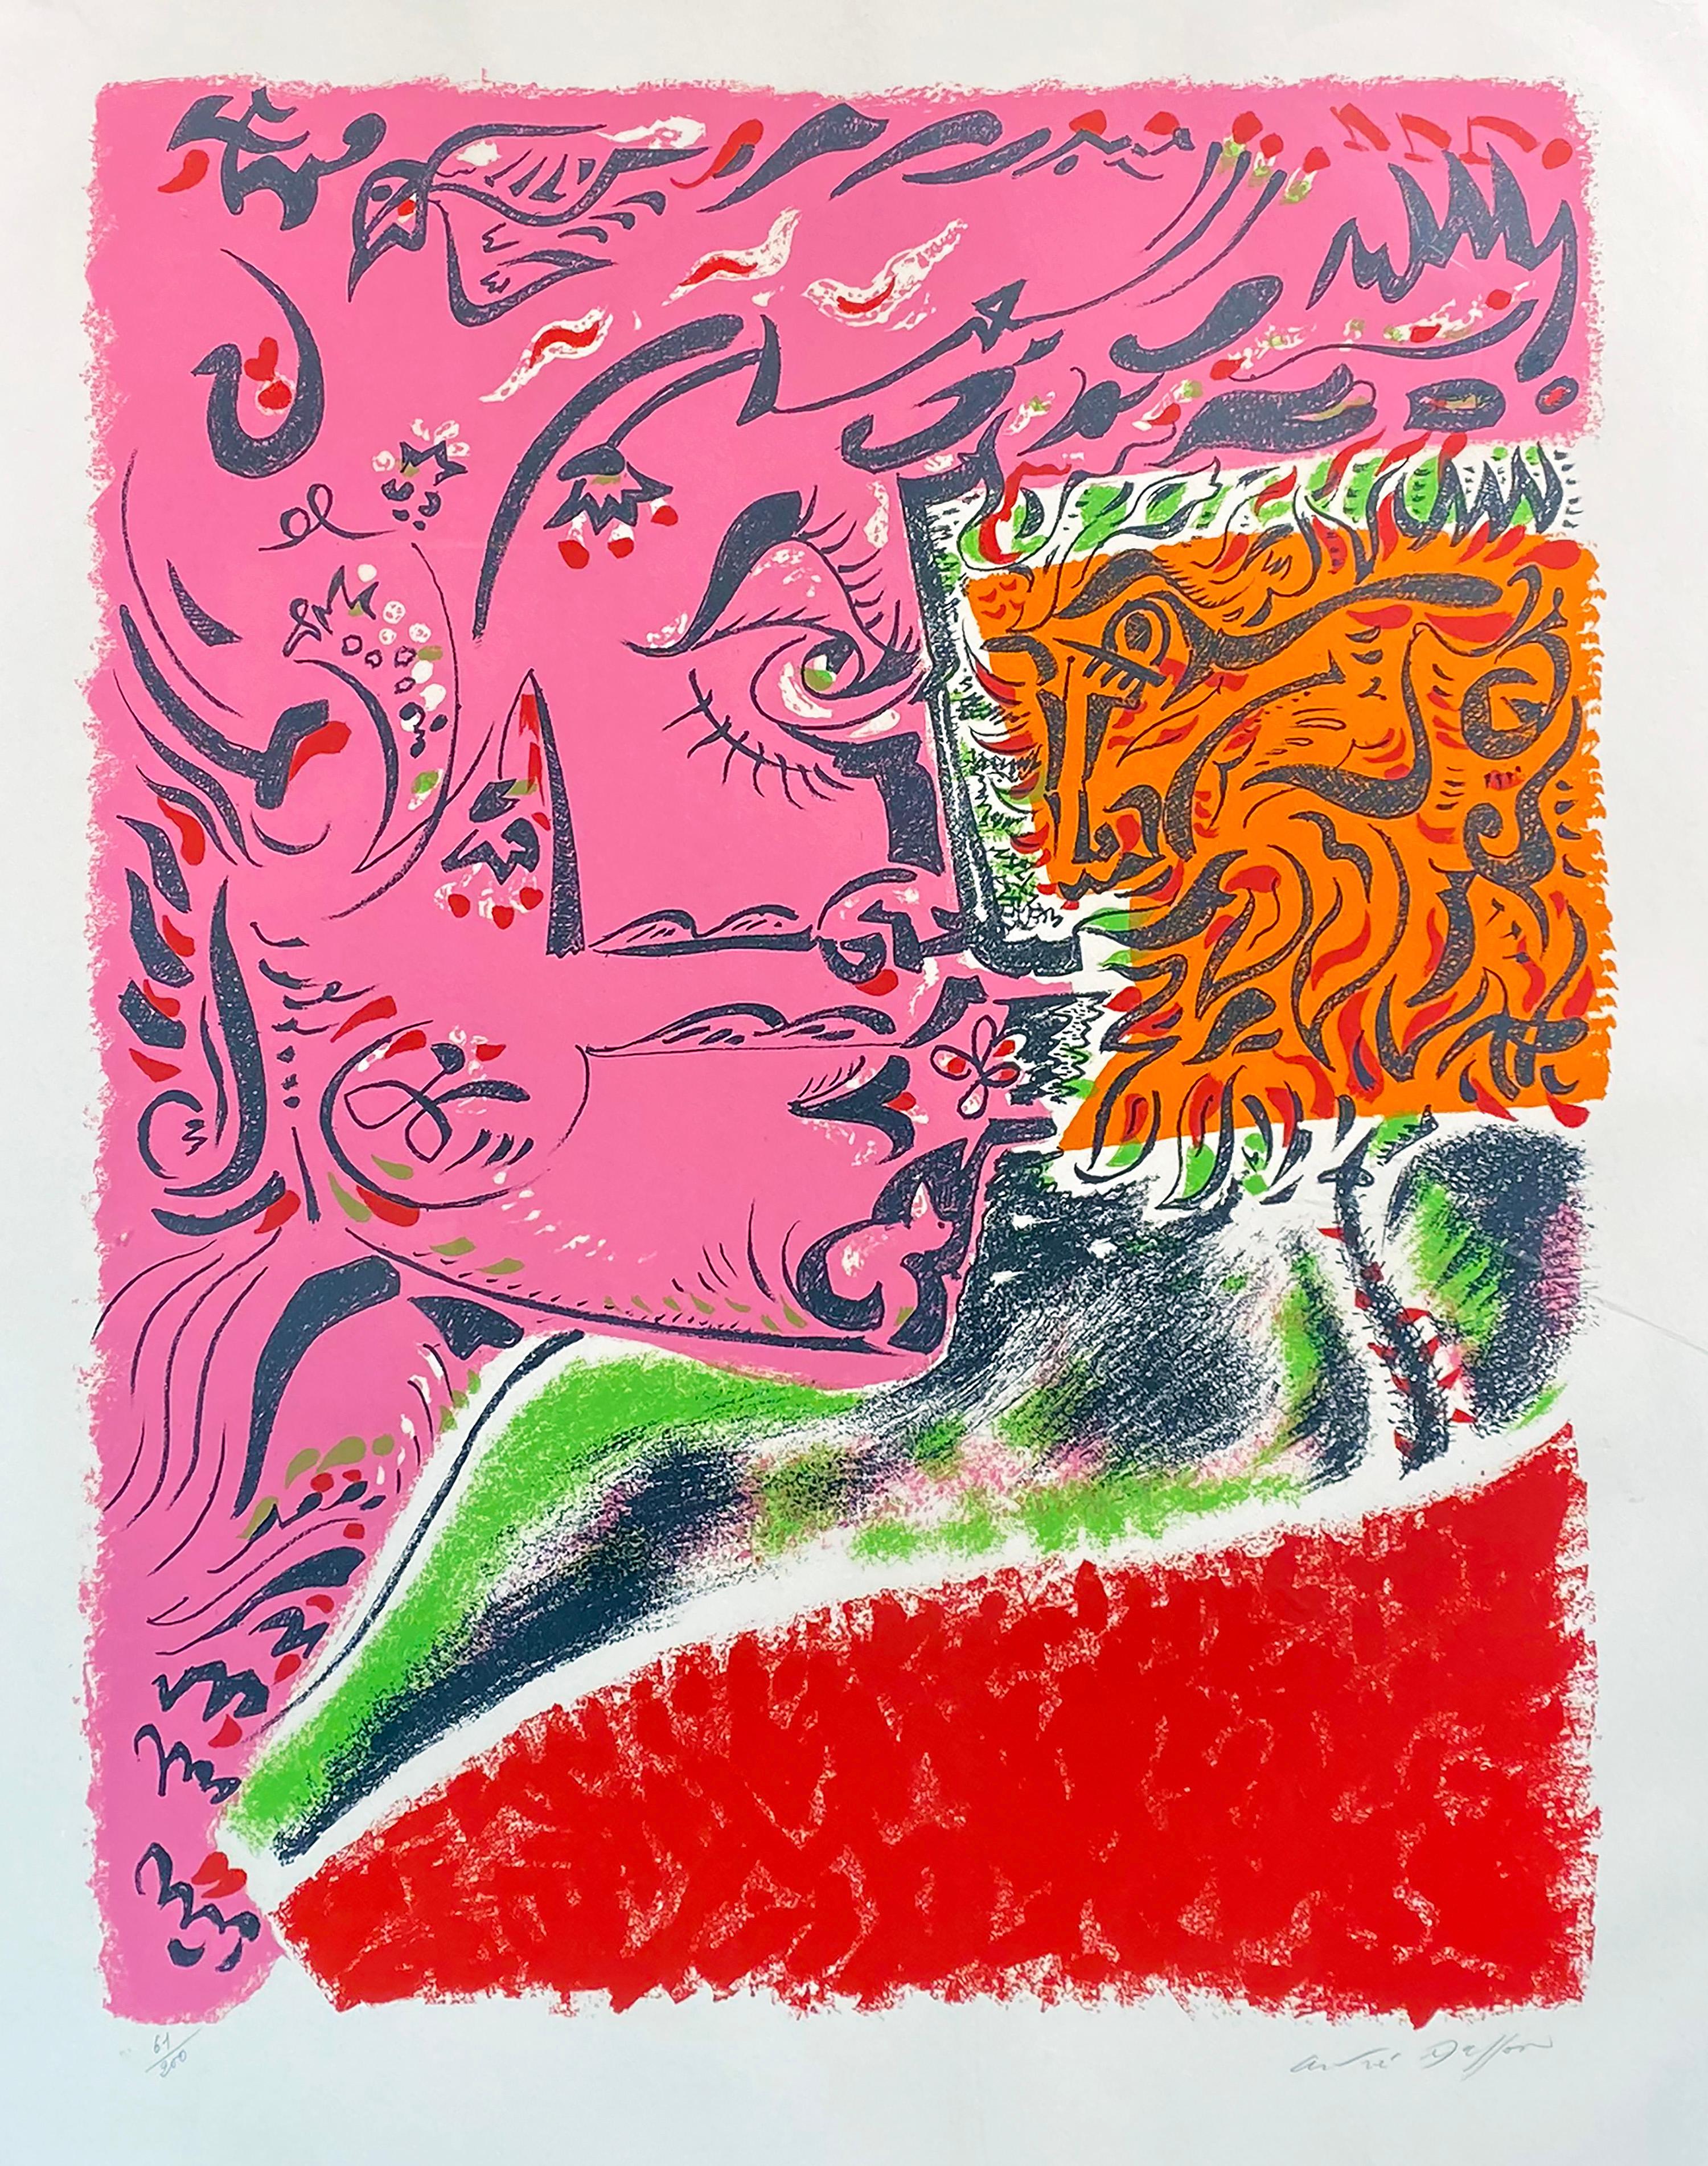 André Masson Abstract Print - Profil Rose